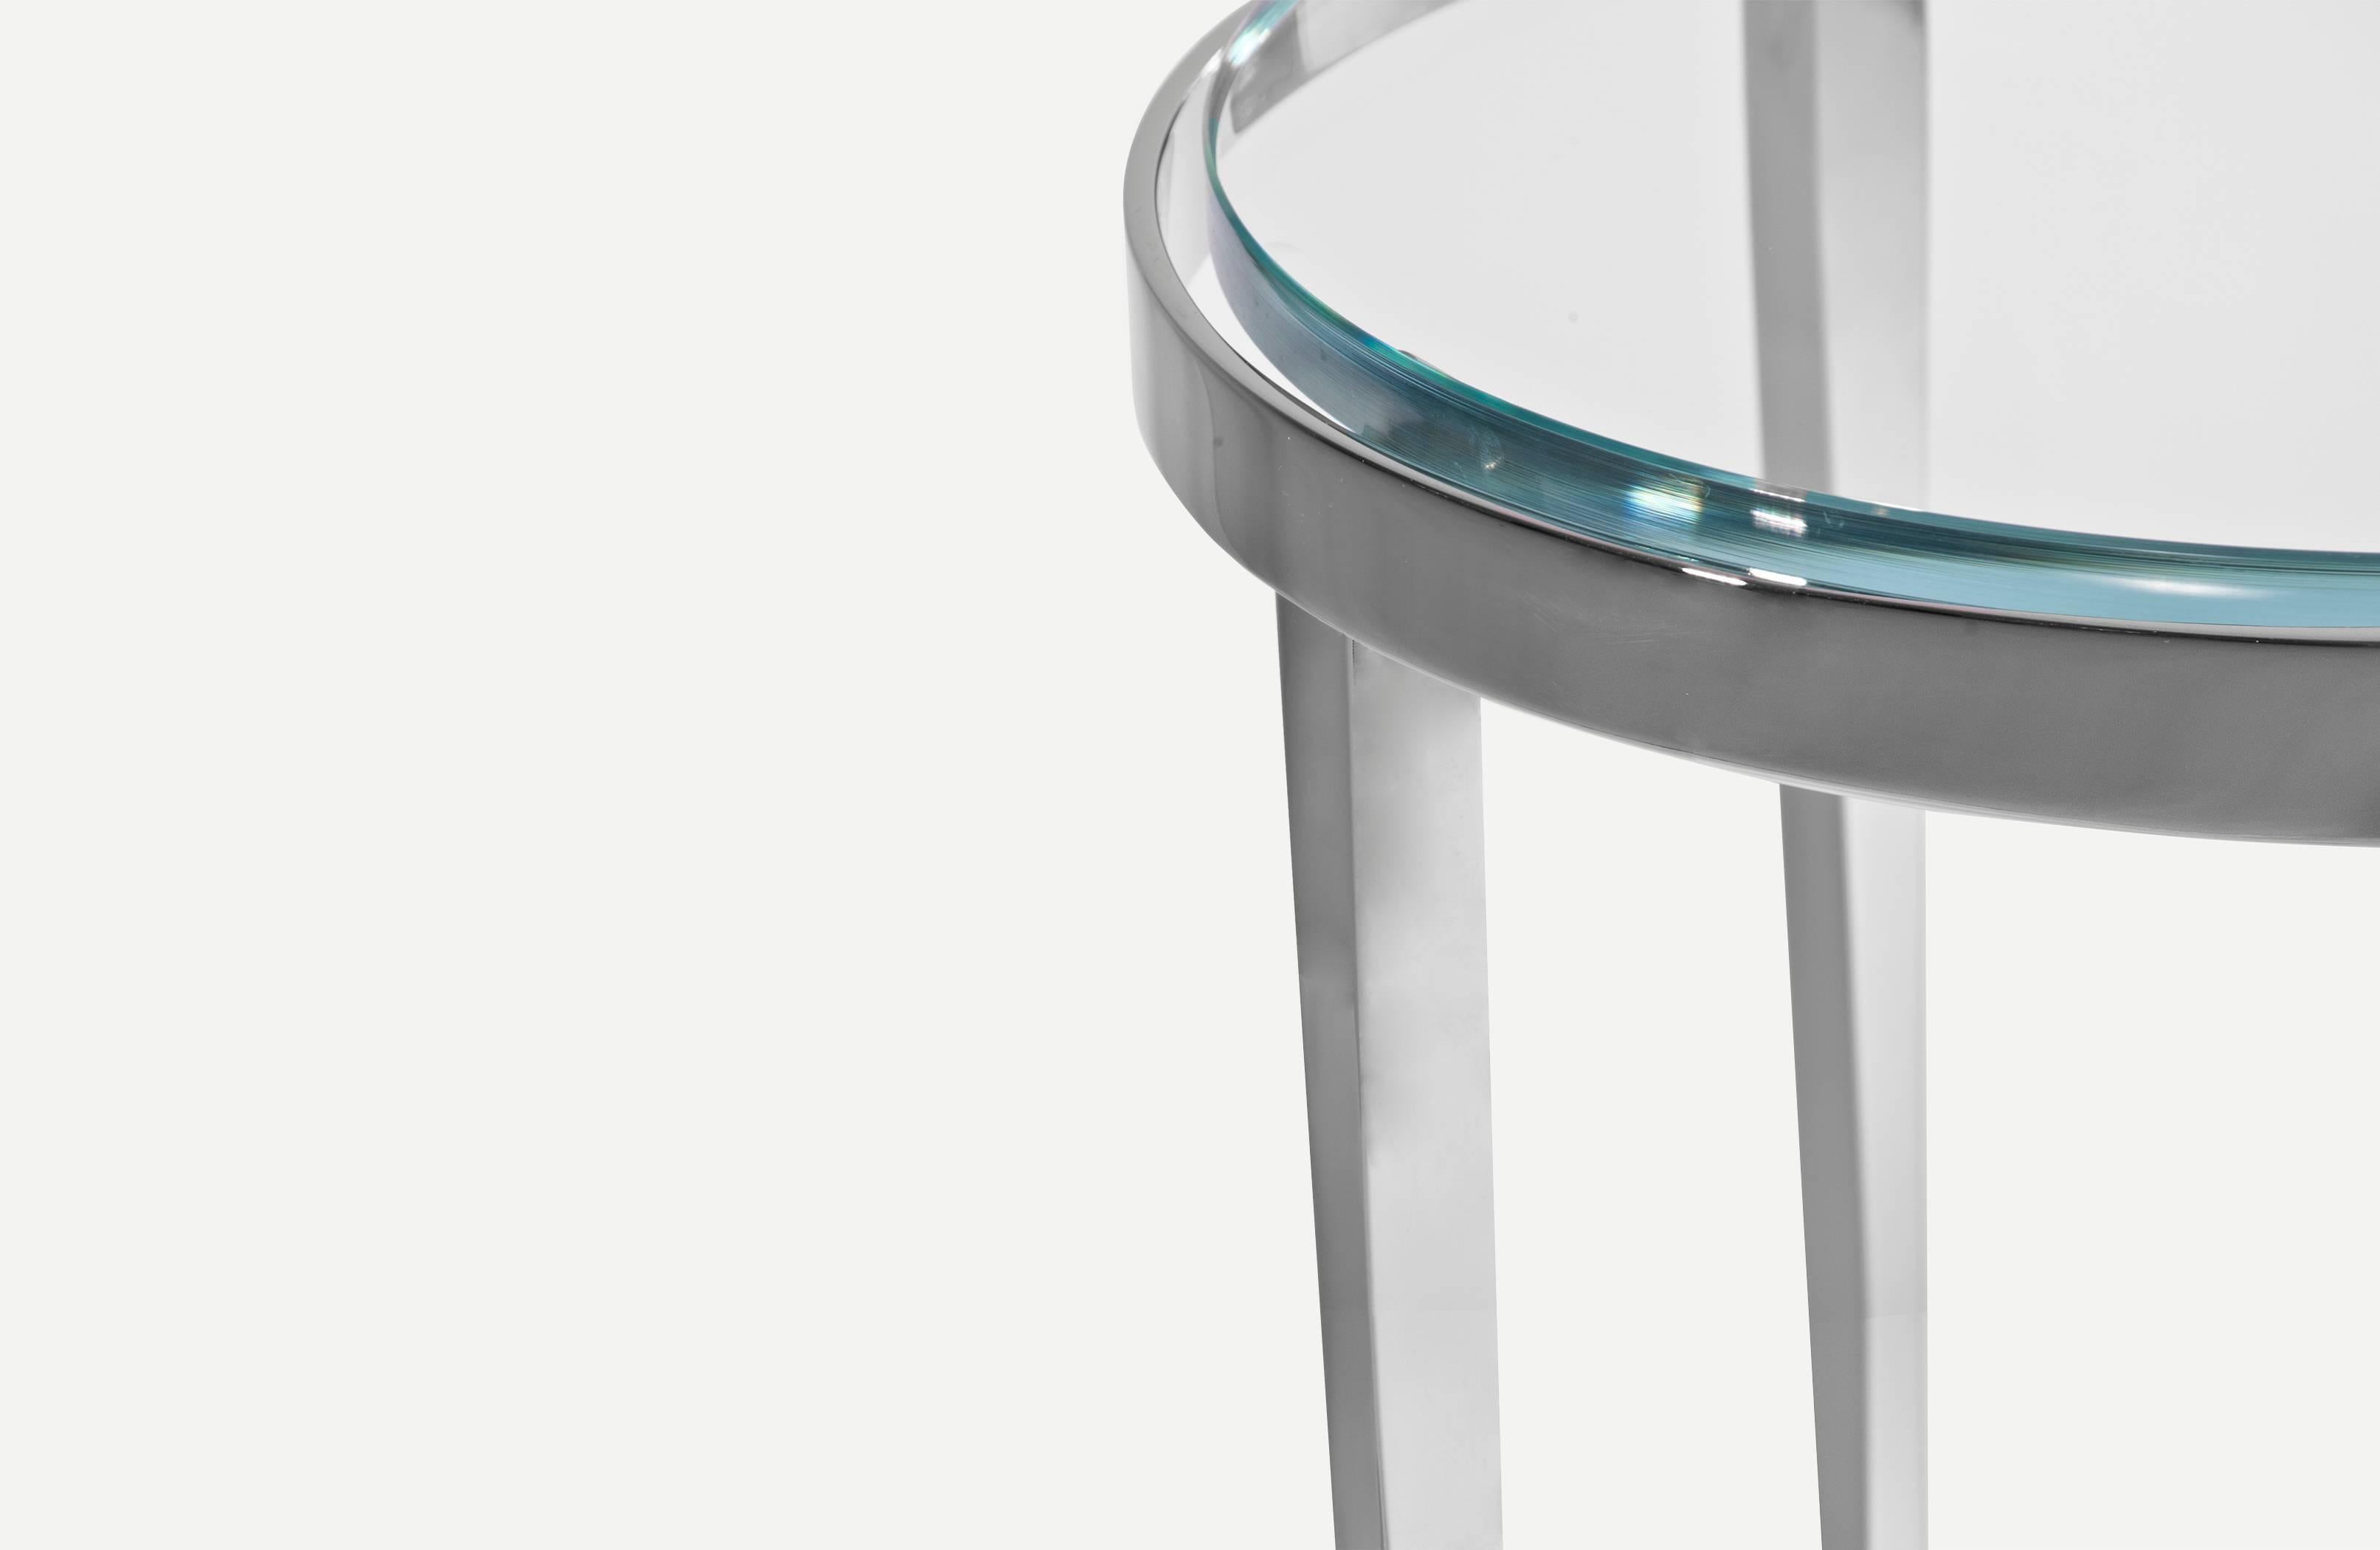 Ainslie, named after Christopher Gentner's favorite street in Chicago, the table was inspired by the poise of a flower stem, having the taper and balance as the focus of the table. Crafted by hand, it is nickel-plated steel has a ¾” thick glass top